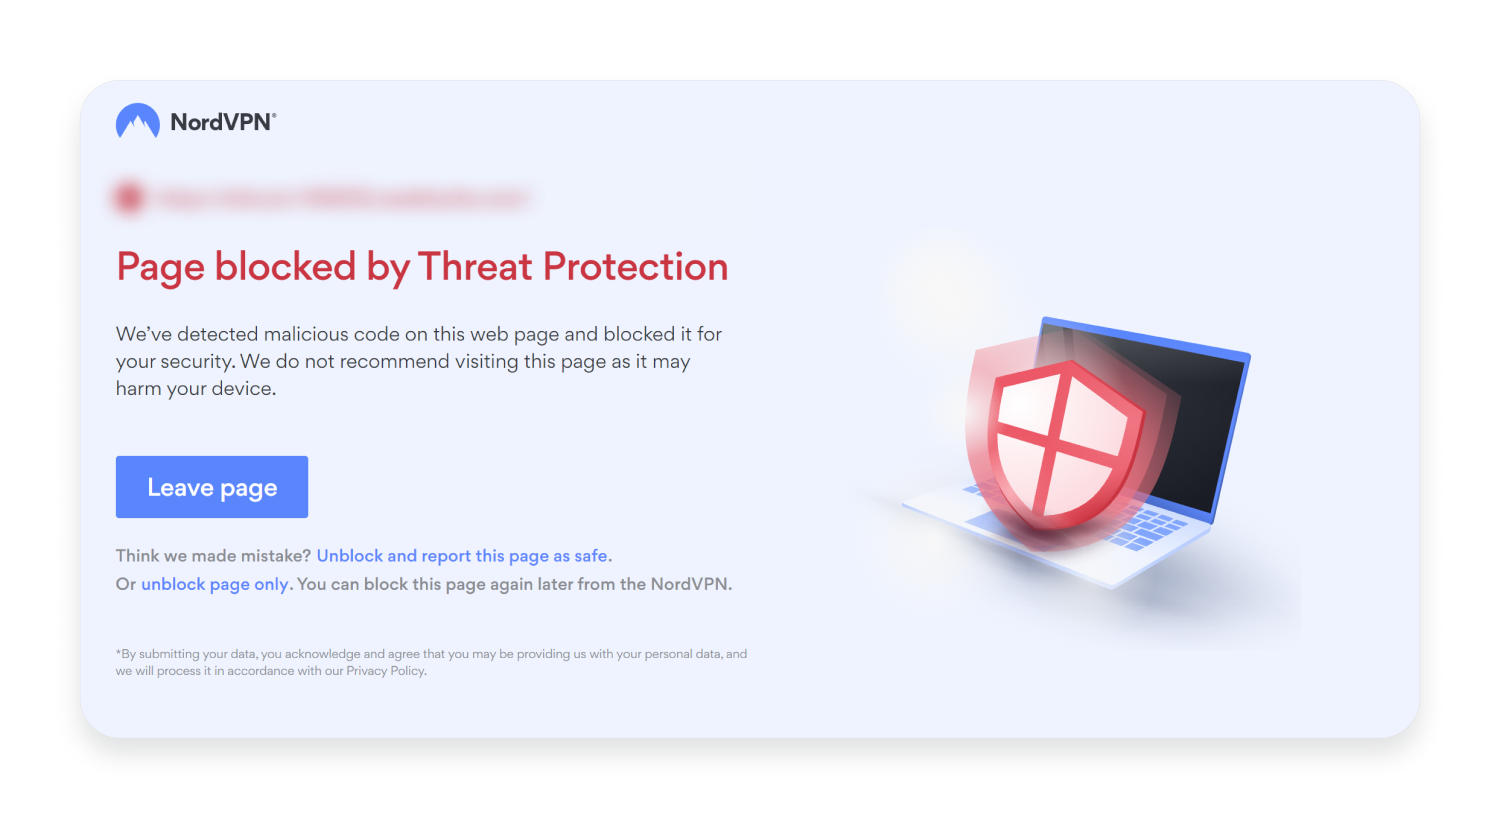 Threat Protection blocking a page